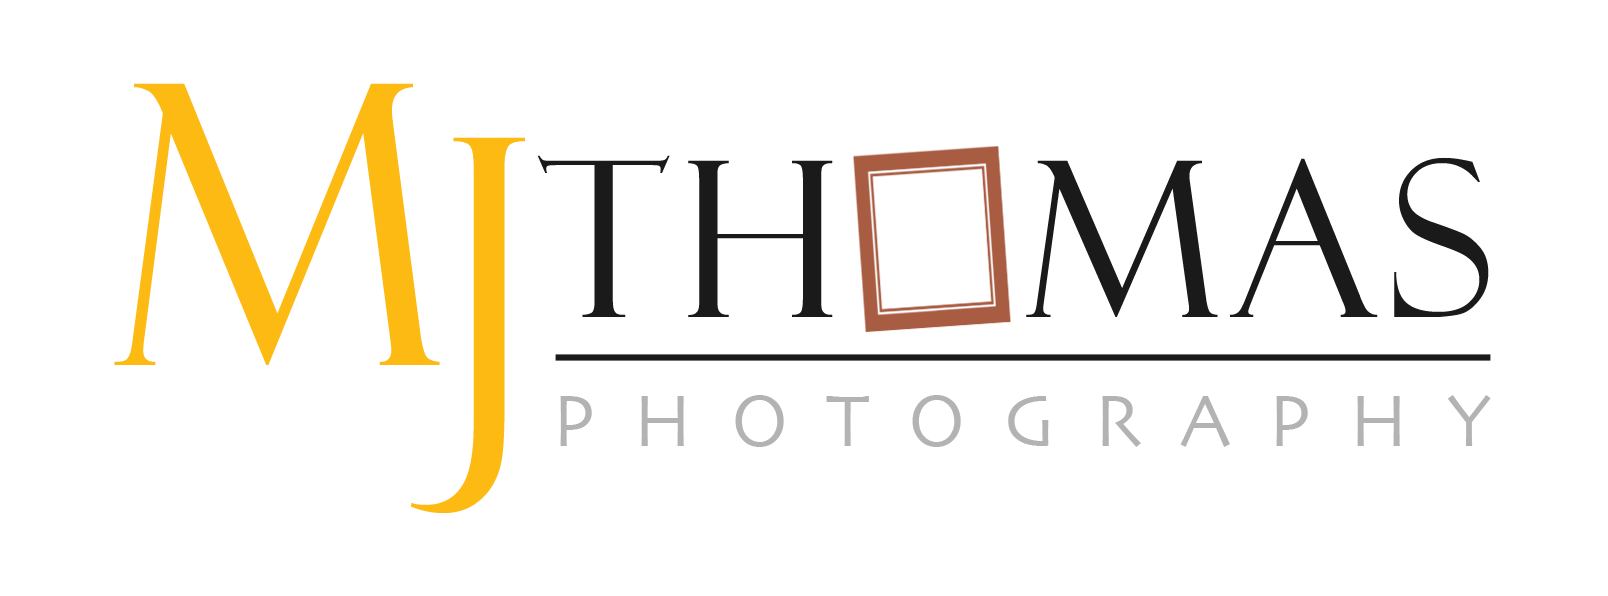 Mj thomas photography school. Yearbook clipart professional photographer